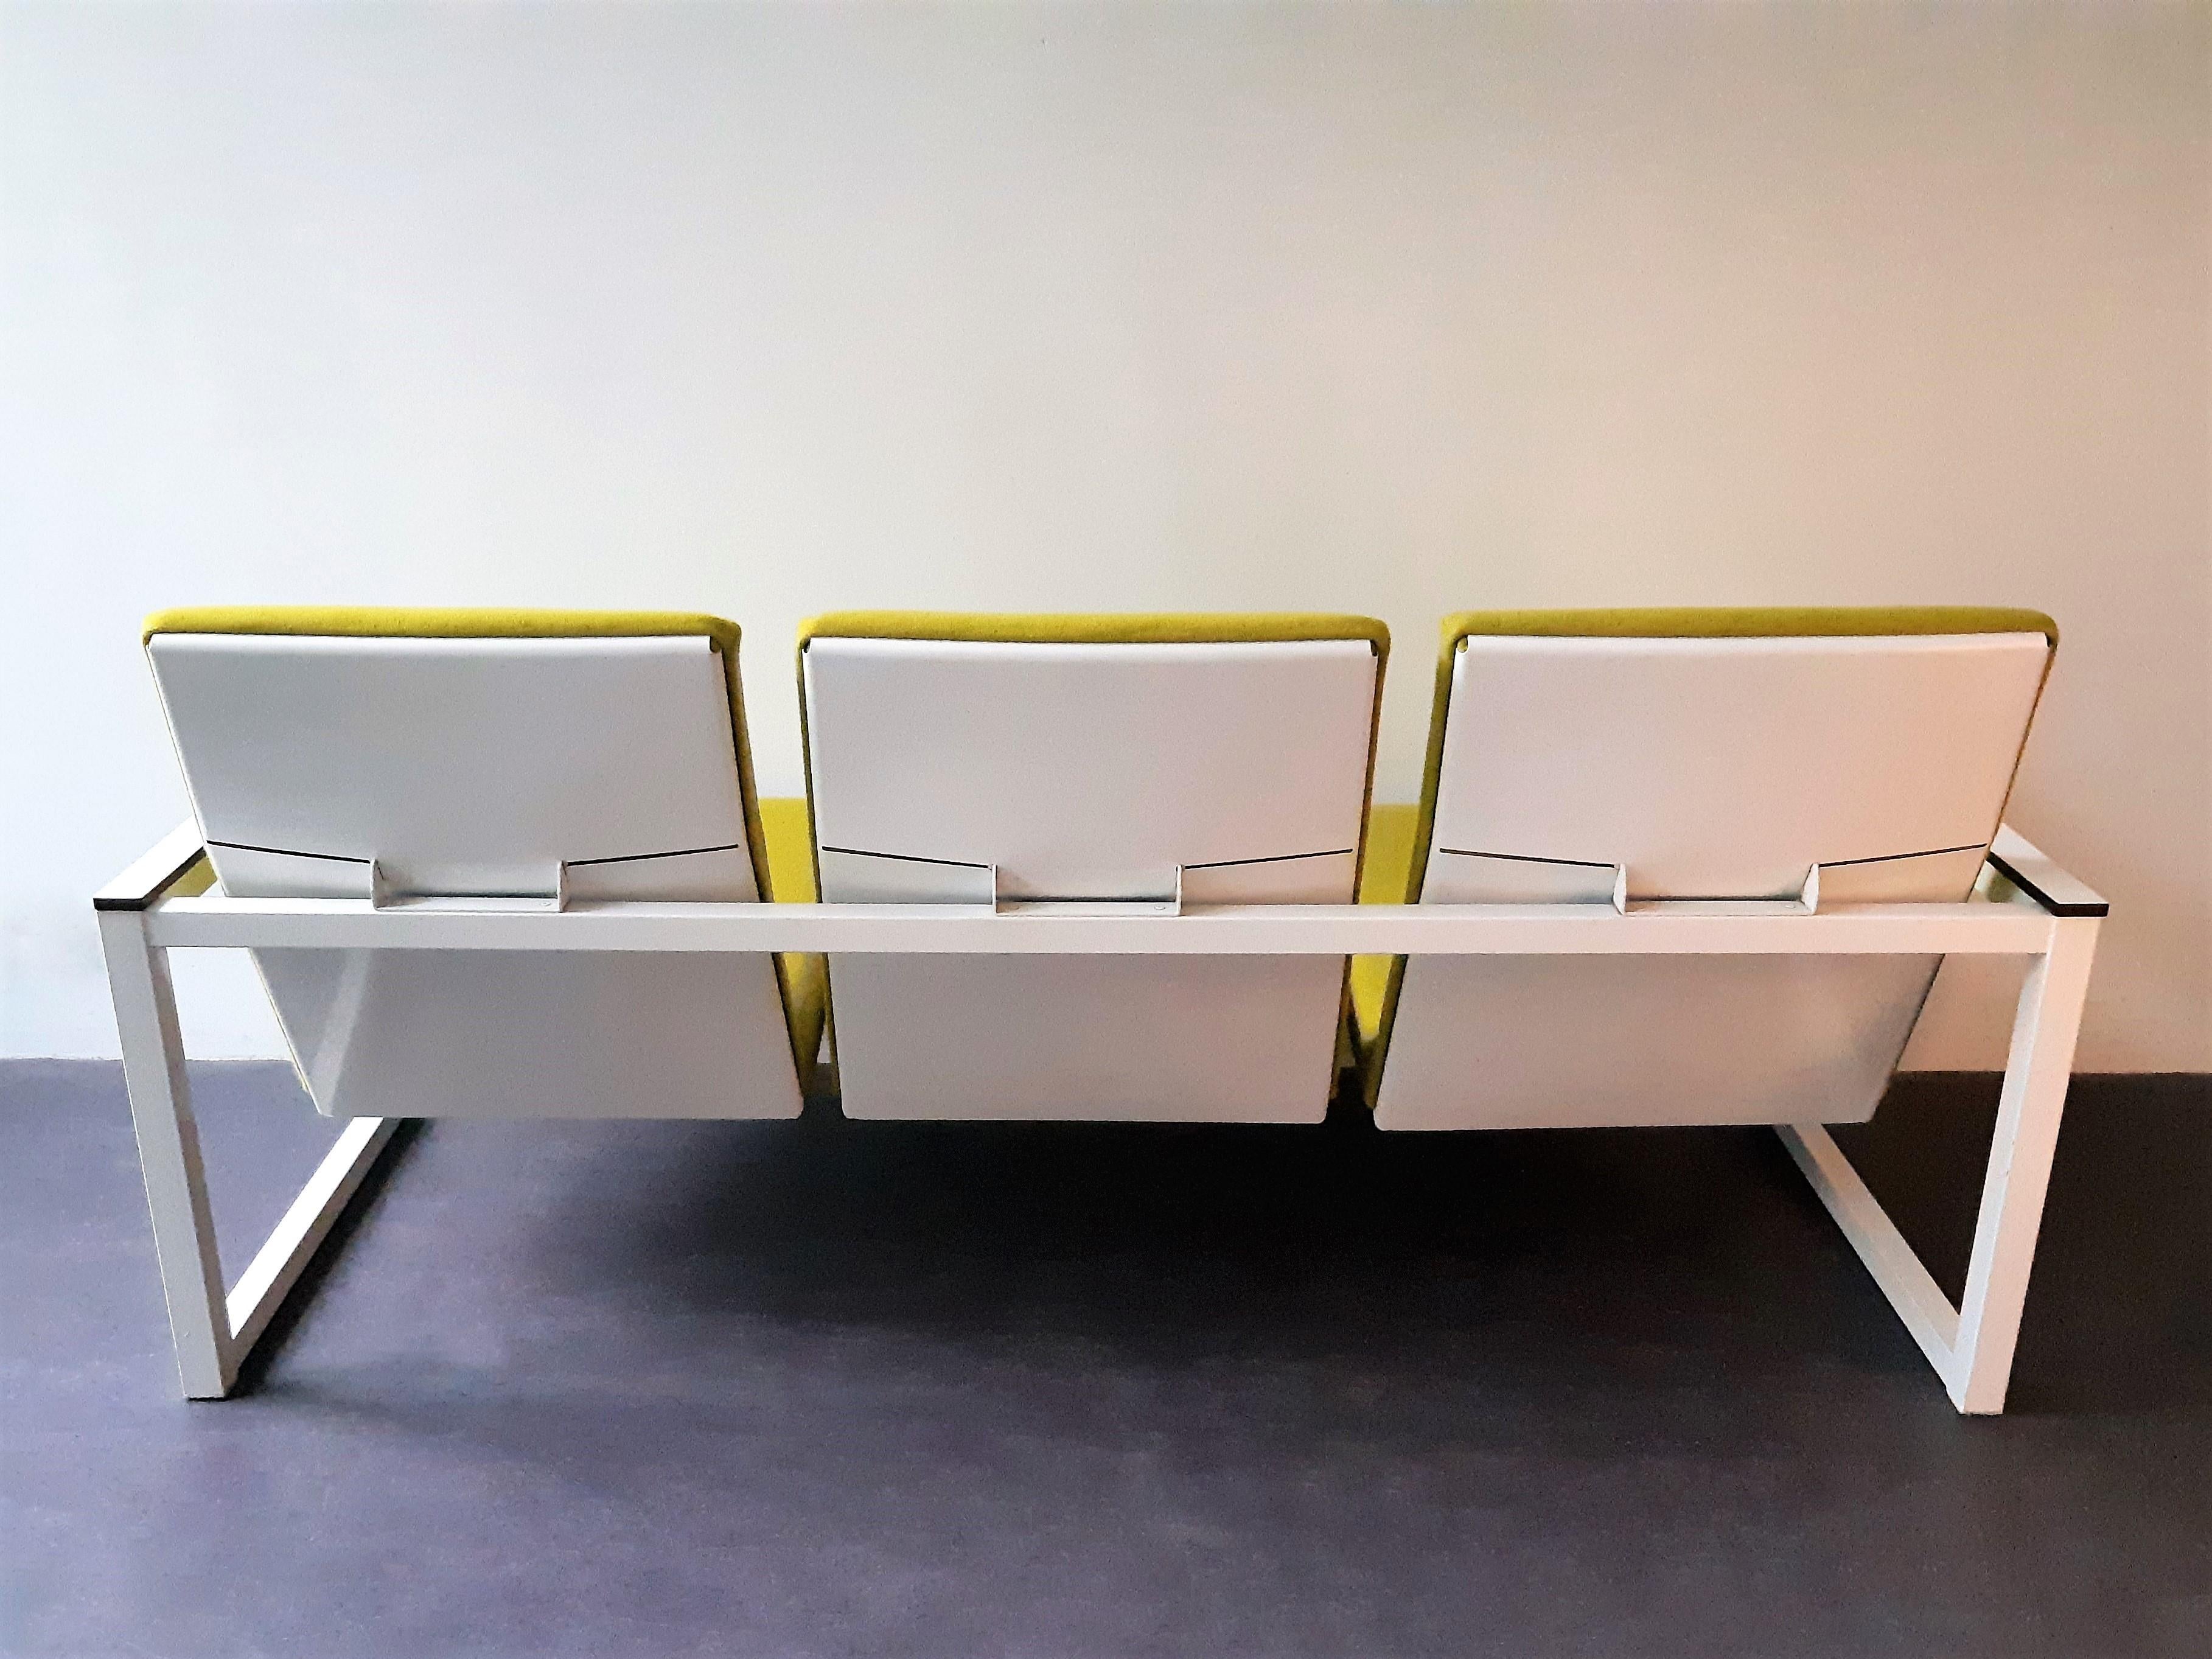 This rare 3-seater sofa is a combination of designs by Tjerk Reijenga and Friso Kramer, produced by Pilastro in 1965. The seat was designed by Friso Kramer for Ahrend de Cirkel 1959 and the sofa as it is was designed by Tjerk Reijenga for Pilastro